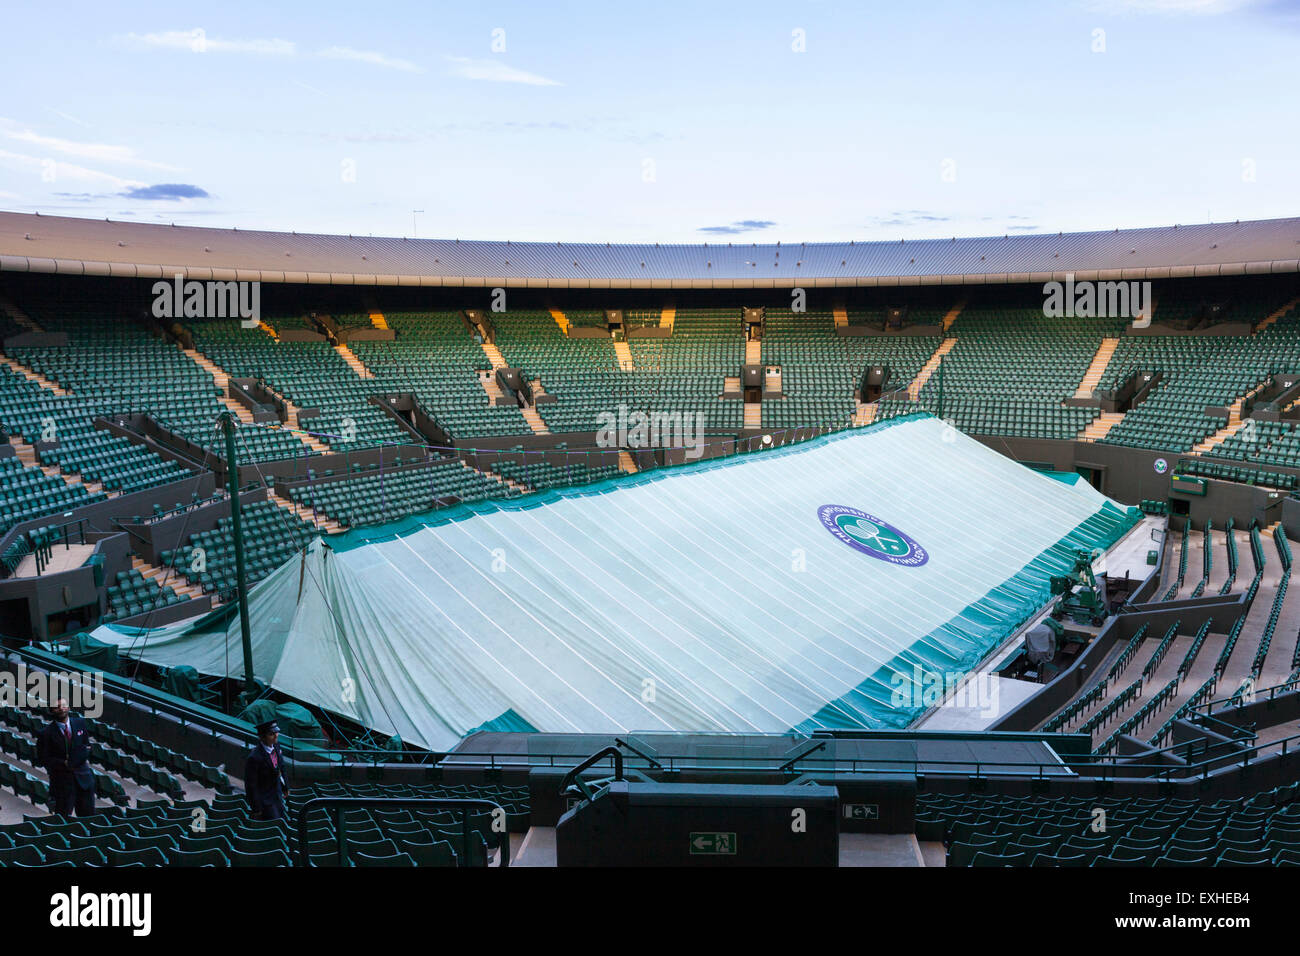 Court No.1 after the last match of the day at the All England Lawn Tennis Club  during the Wimbledon Championships, London Stock Photo